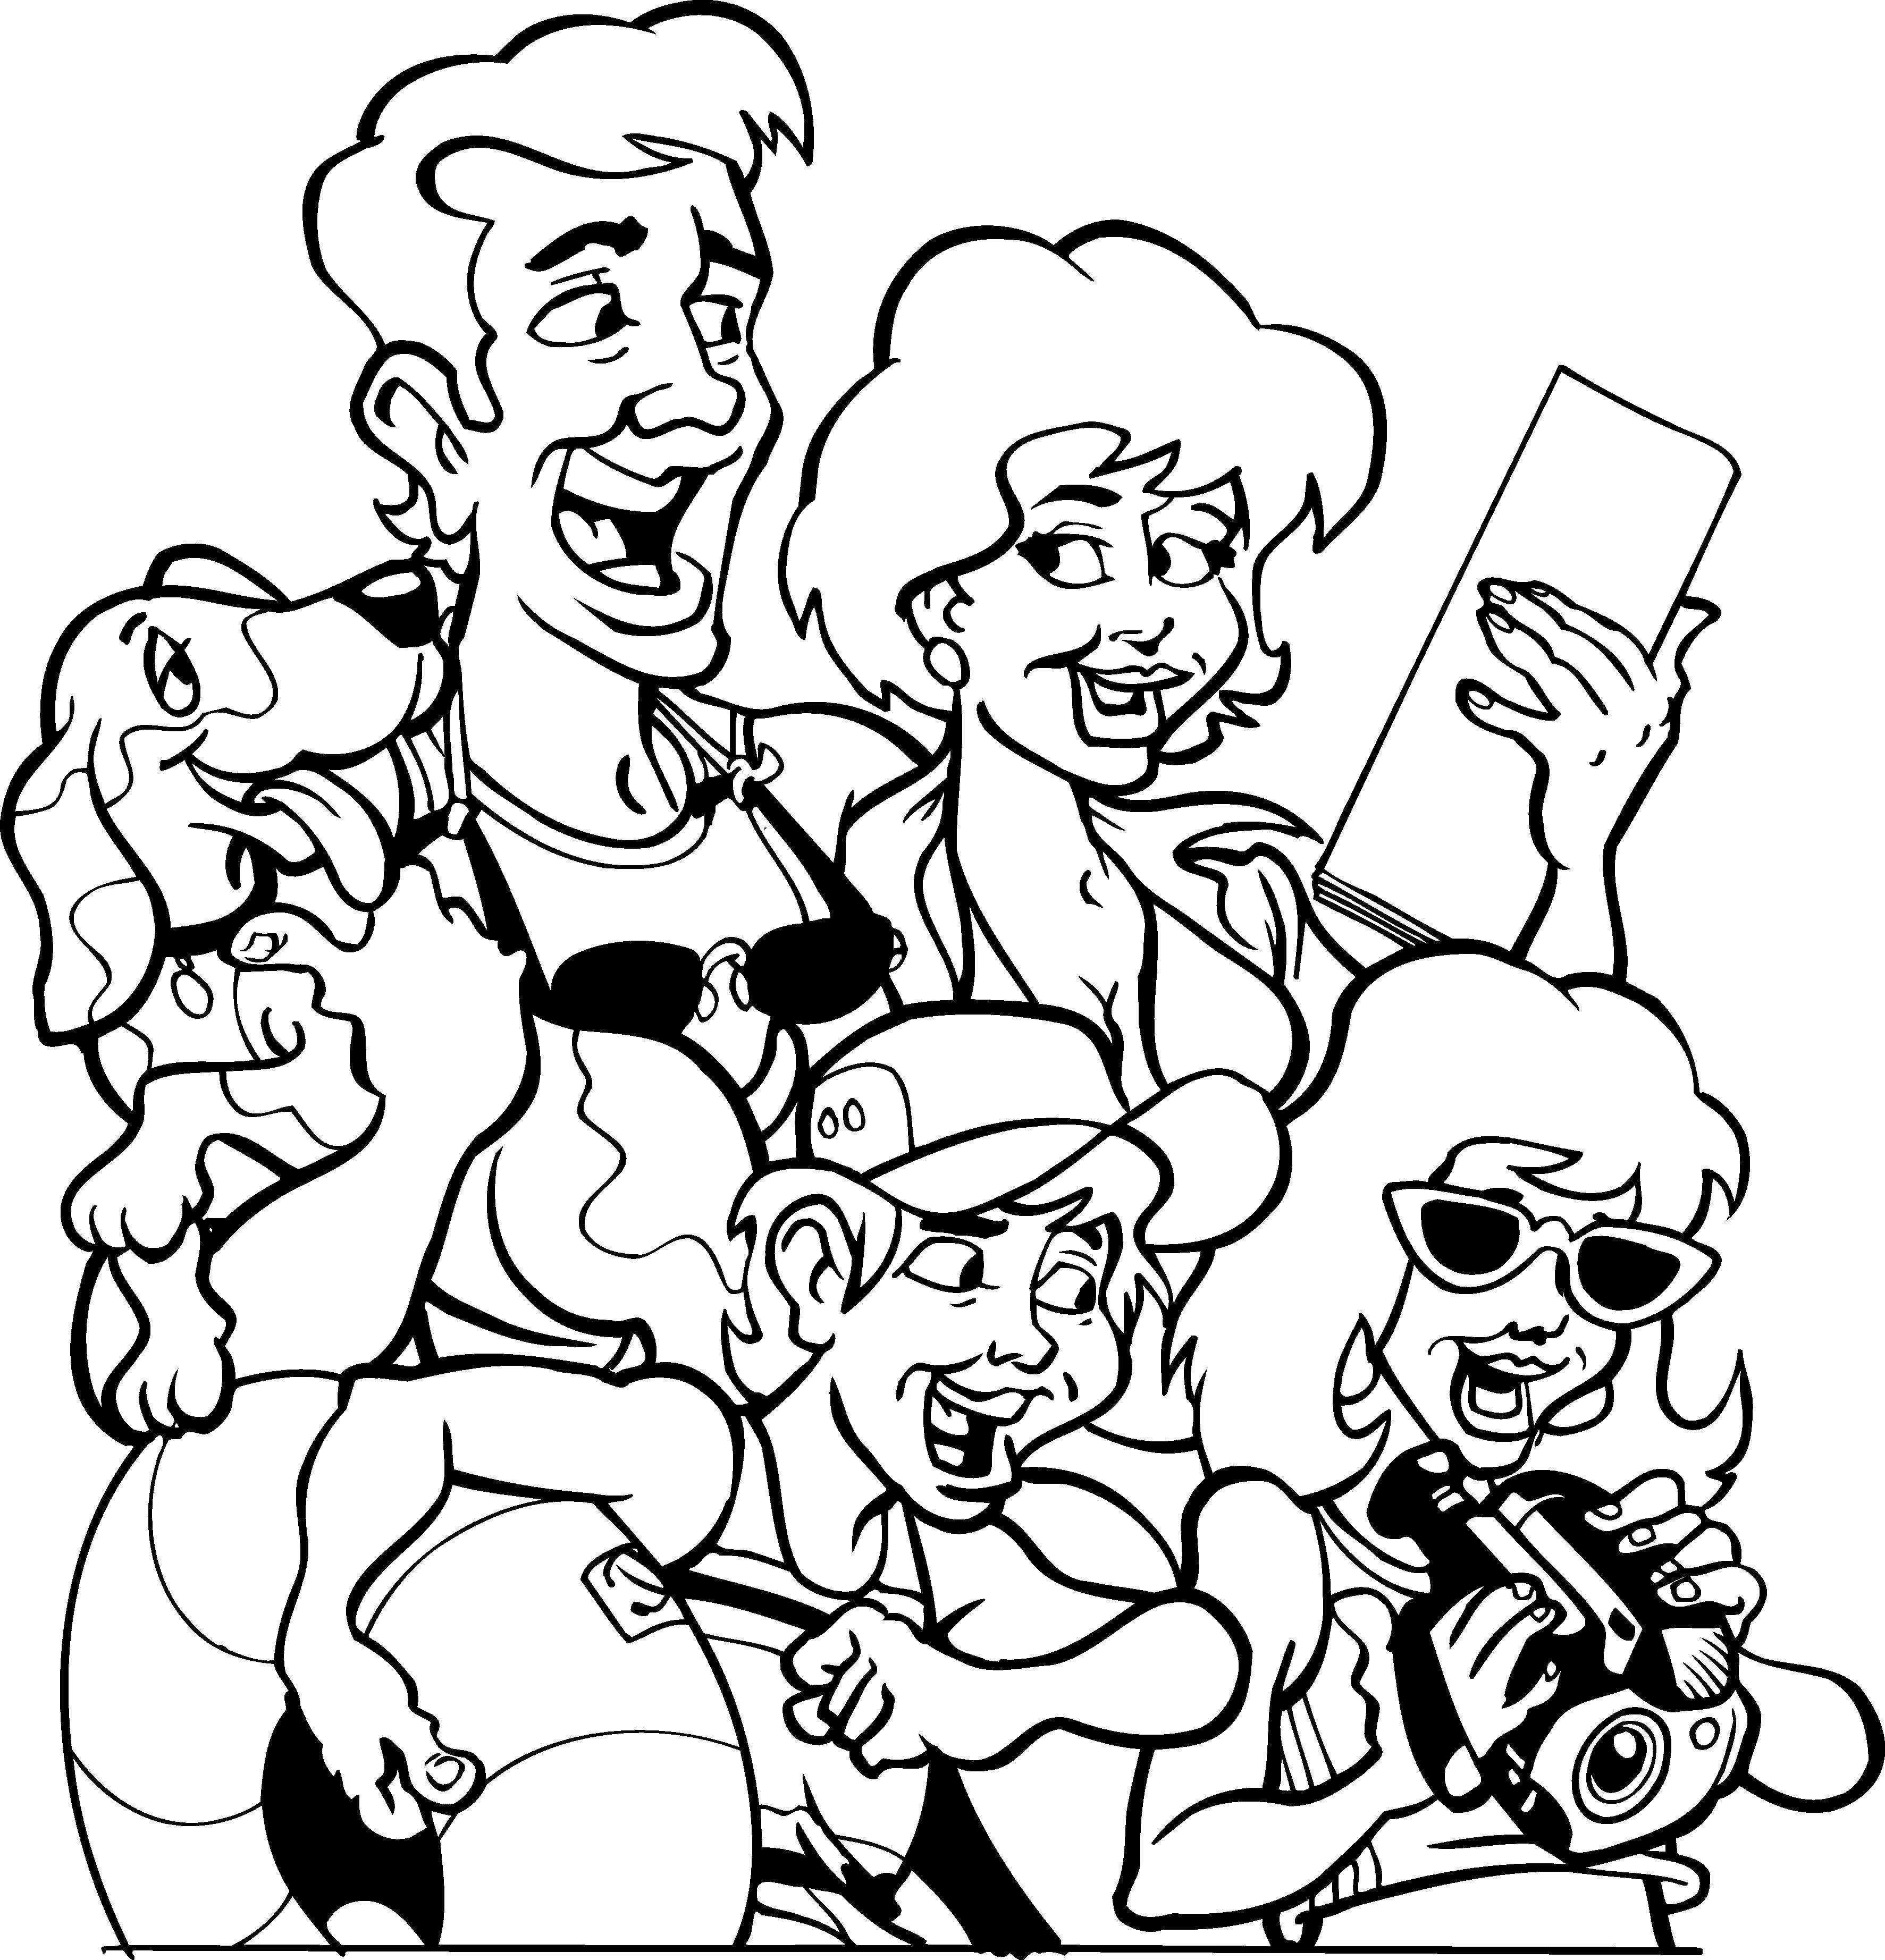 Coloring Family on vacation. Category Family. Tags:  family, vacation, dog.